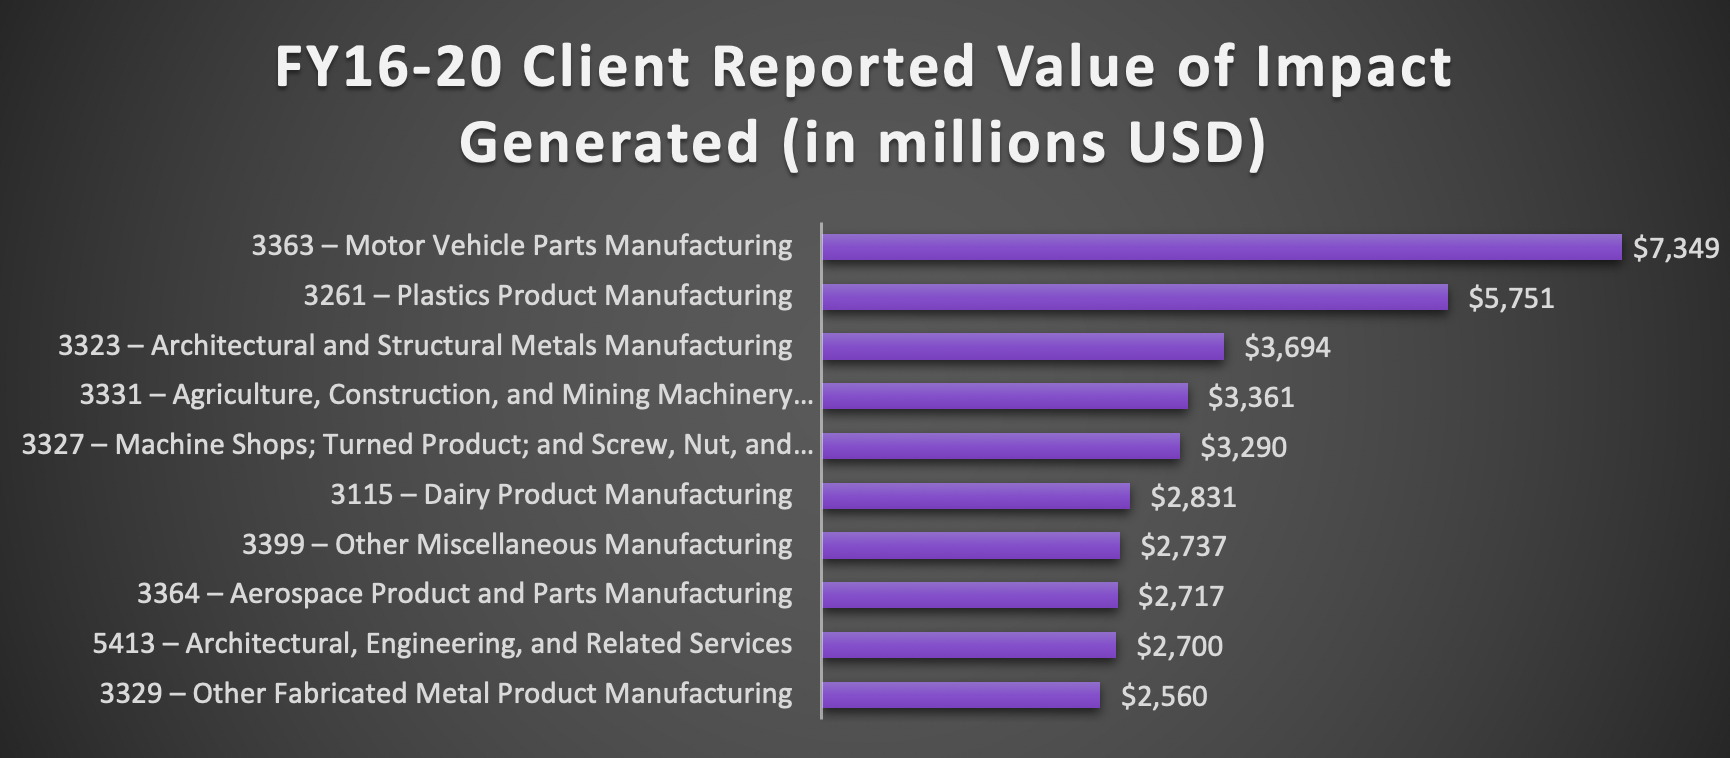 FY16-20 Client Reported Value of Impact Generated (in millions USD)